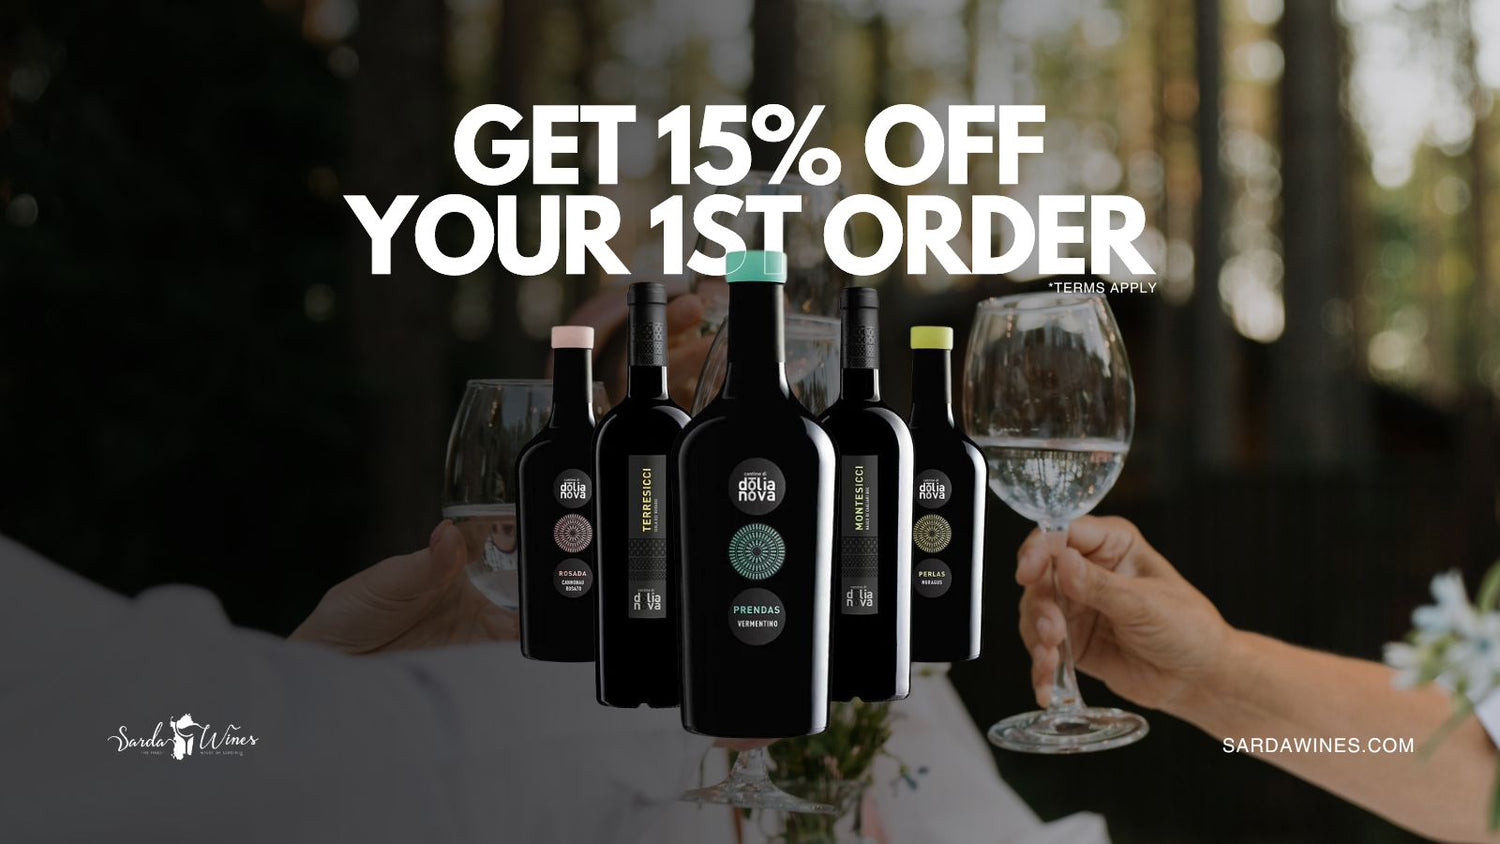 15% off first order